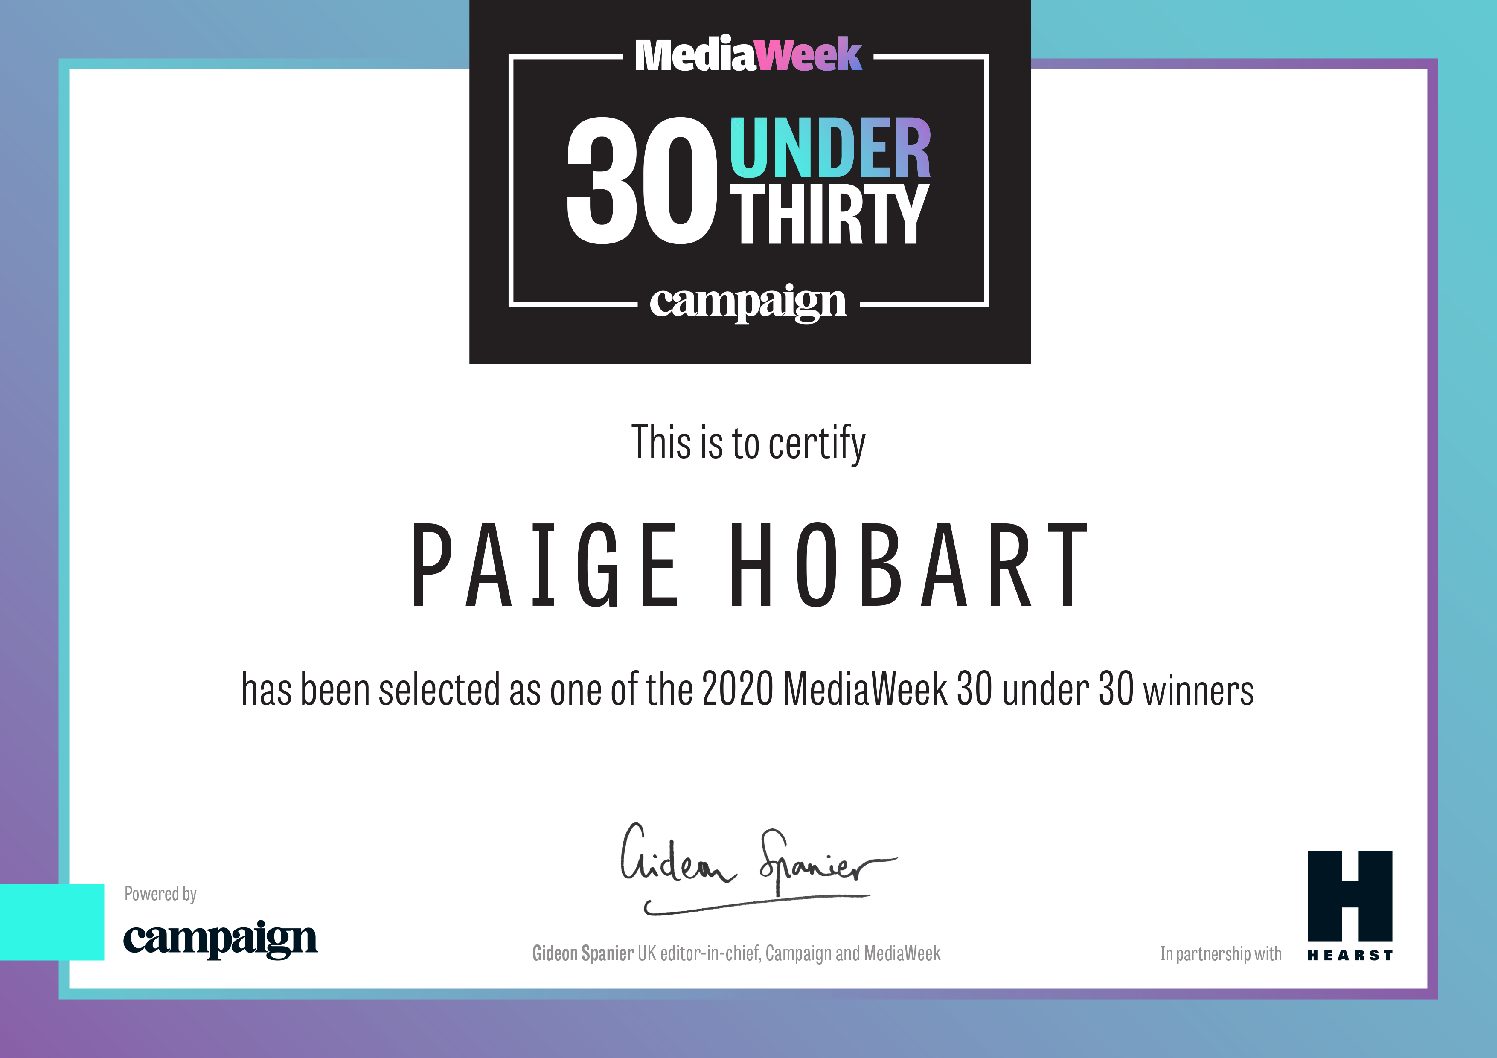 Paige Hobart, SEO Team Director at ROAST announced as one of Campaign Media Week’s 30 Under 30